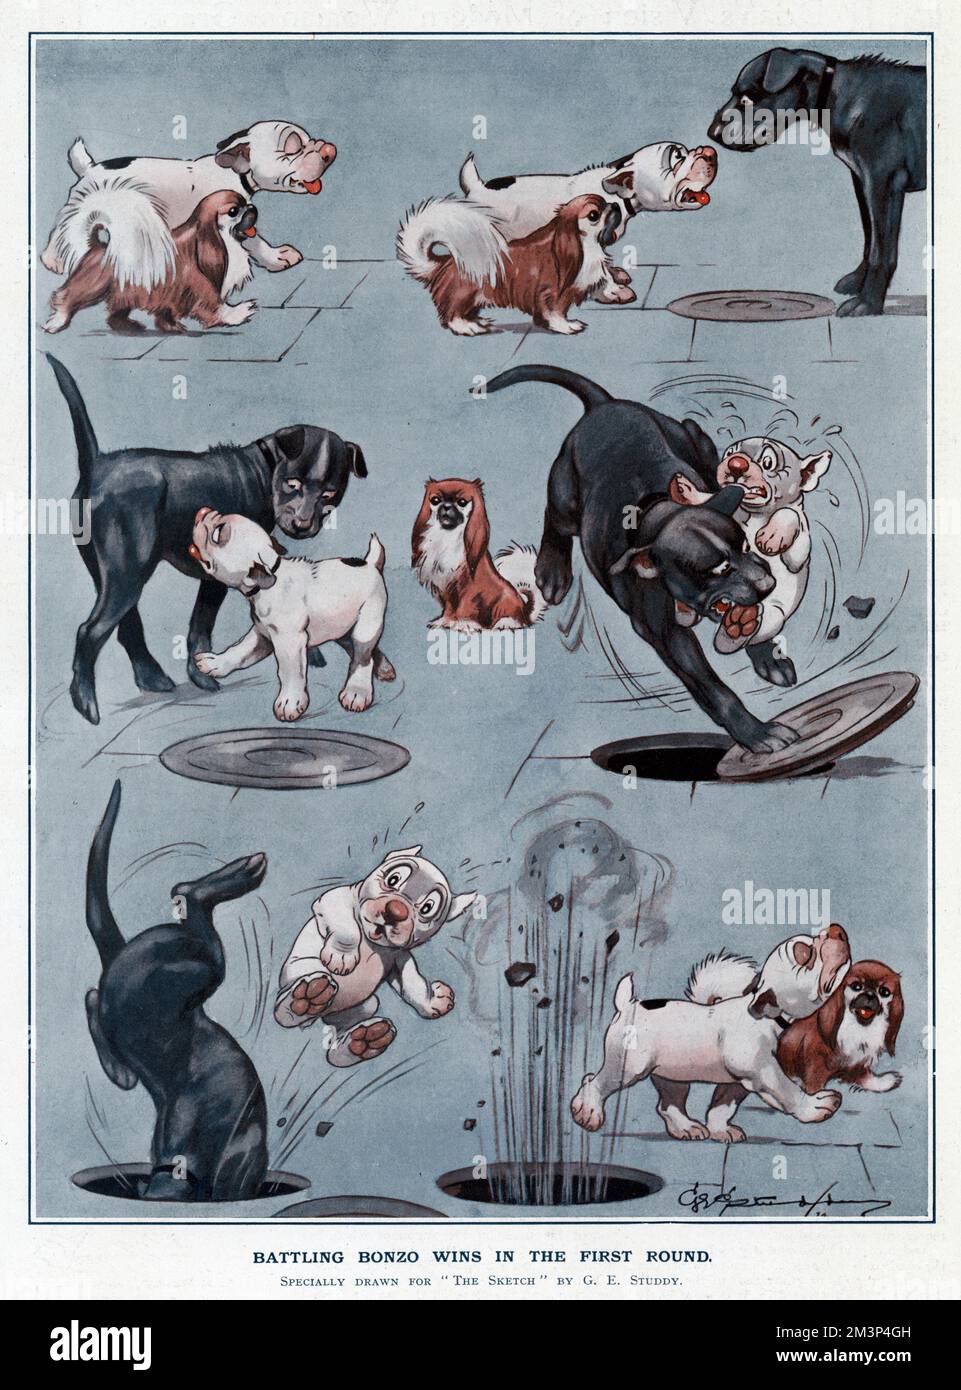 Battling Bonzo wins in the first round.  He tackles a black dog bigger than himself, and takes the credit when the enemy accidentally falls down a manhole.  George Ernest Studdy (1878-1948), was the creator of 'Bonzo', a small dog with saucer-like eyes and indiscriminate breeding who first appeared in the Sketch in 1922. The 'Bonzo' craze swept the world resulting in postcards, annuals, toys and other merchandise.  Credit should read: Estate of George Studdy/Gresham Marketing Ltd./ILN/Mary Evans     Date: 18 April 1923 Stock Photo